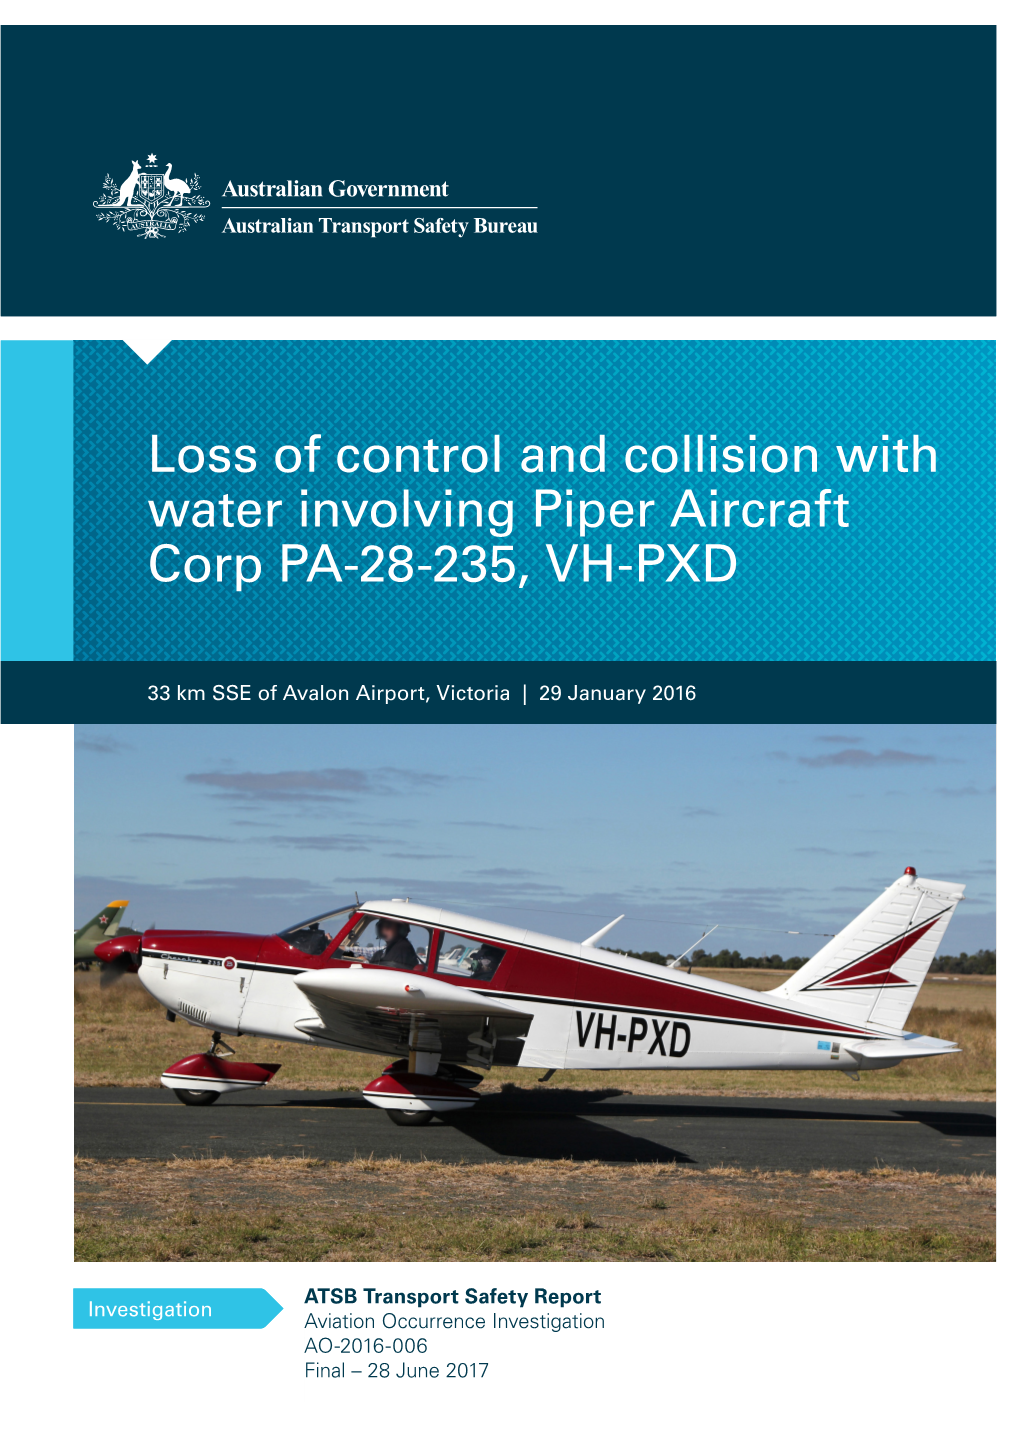 Loss of Control and Collision with Water Involving Piper Aircraft Corp PA-28-235, VH-PXD, 33 Km SSE of Avalon Airport, Victoria on 29 January 2016